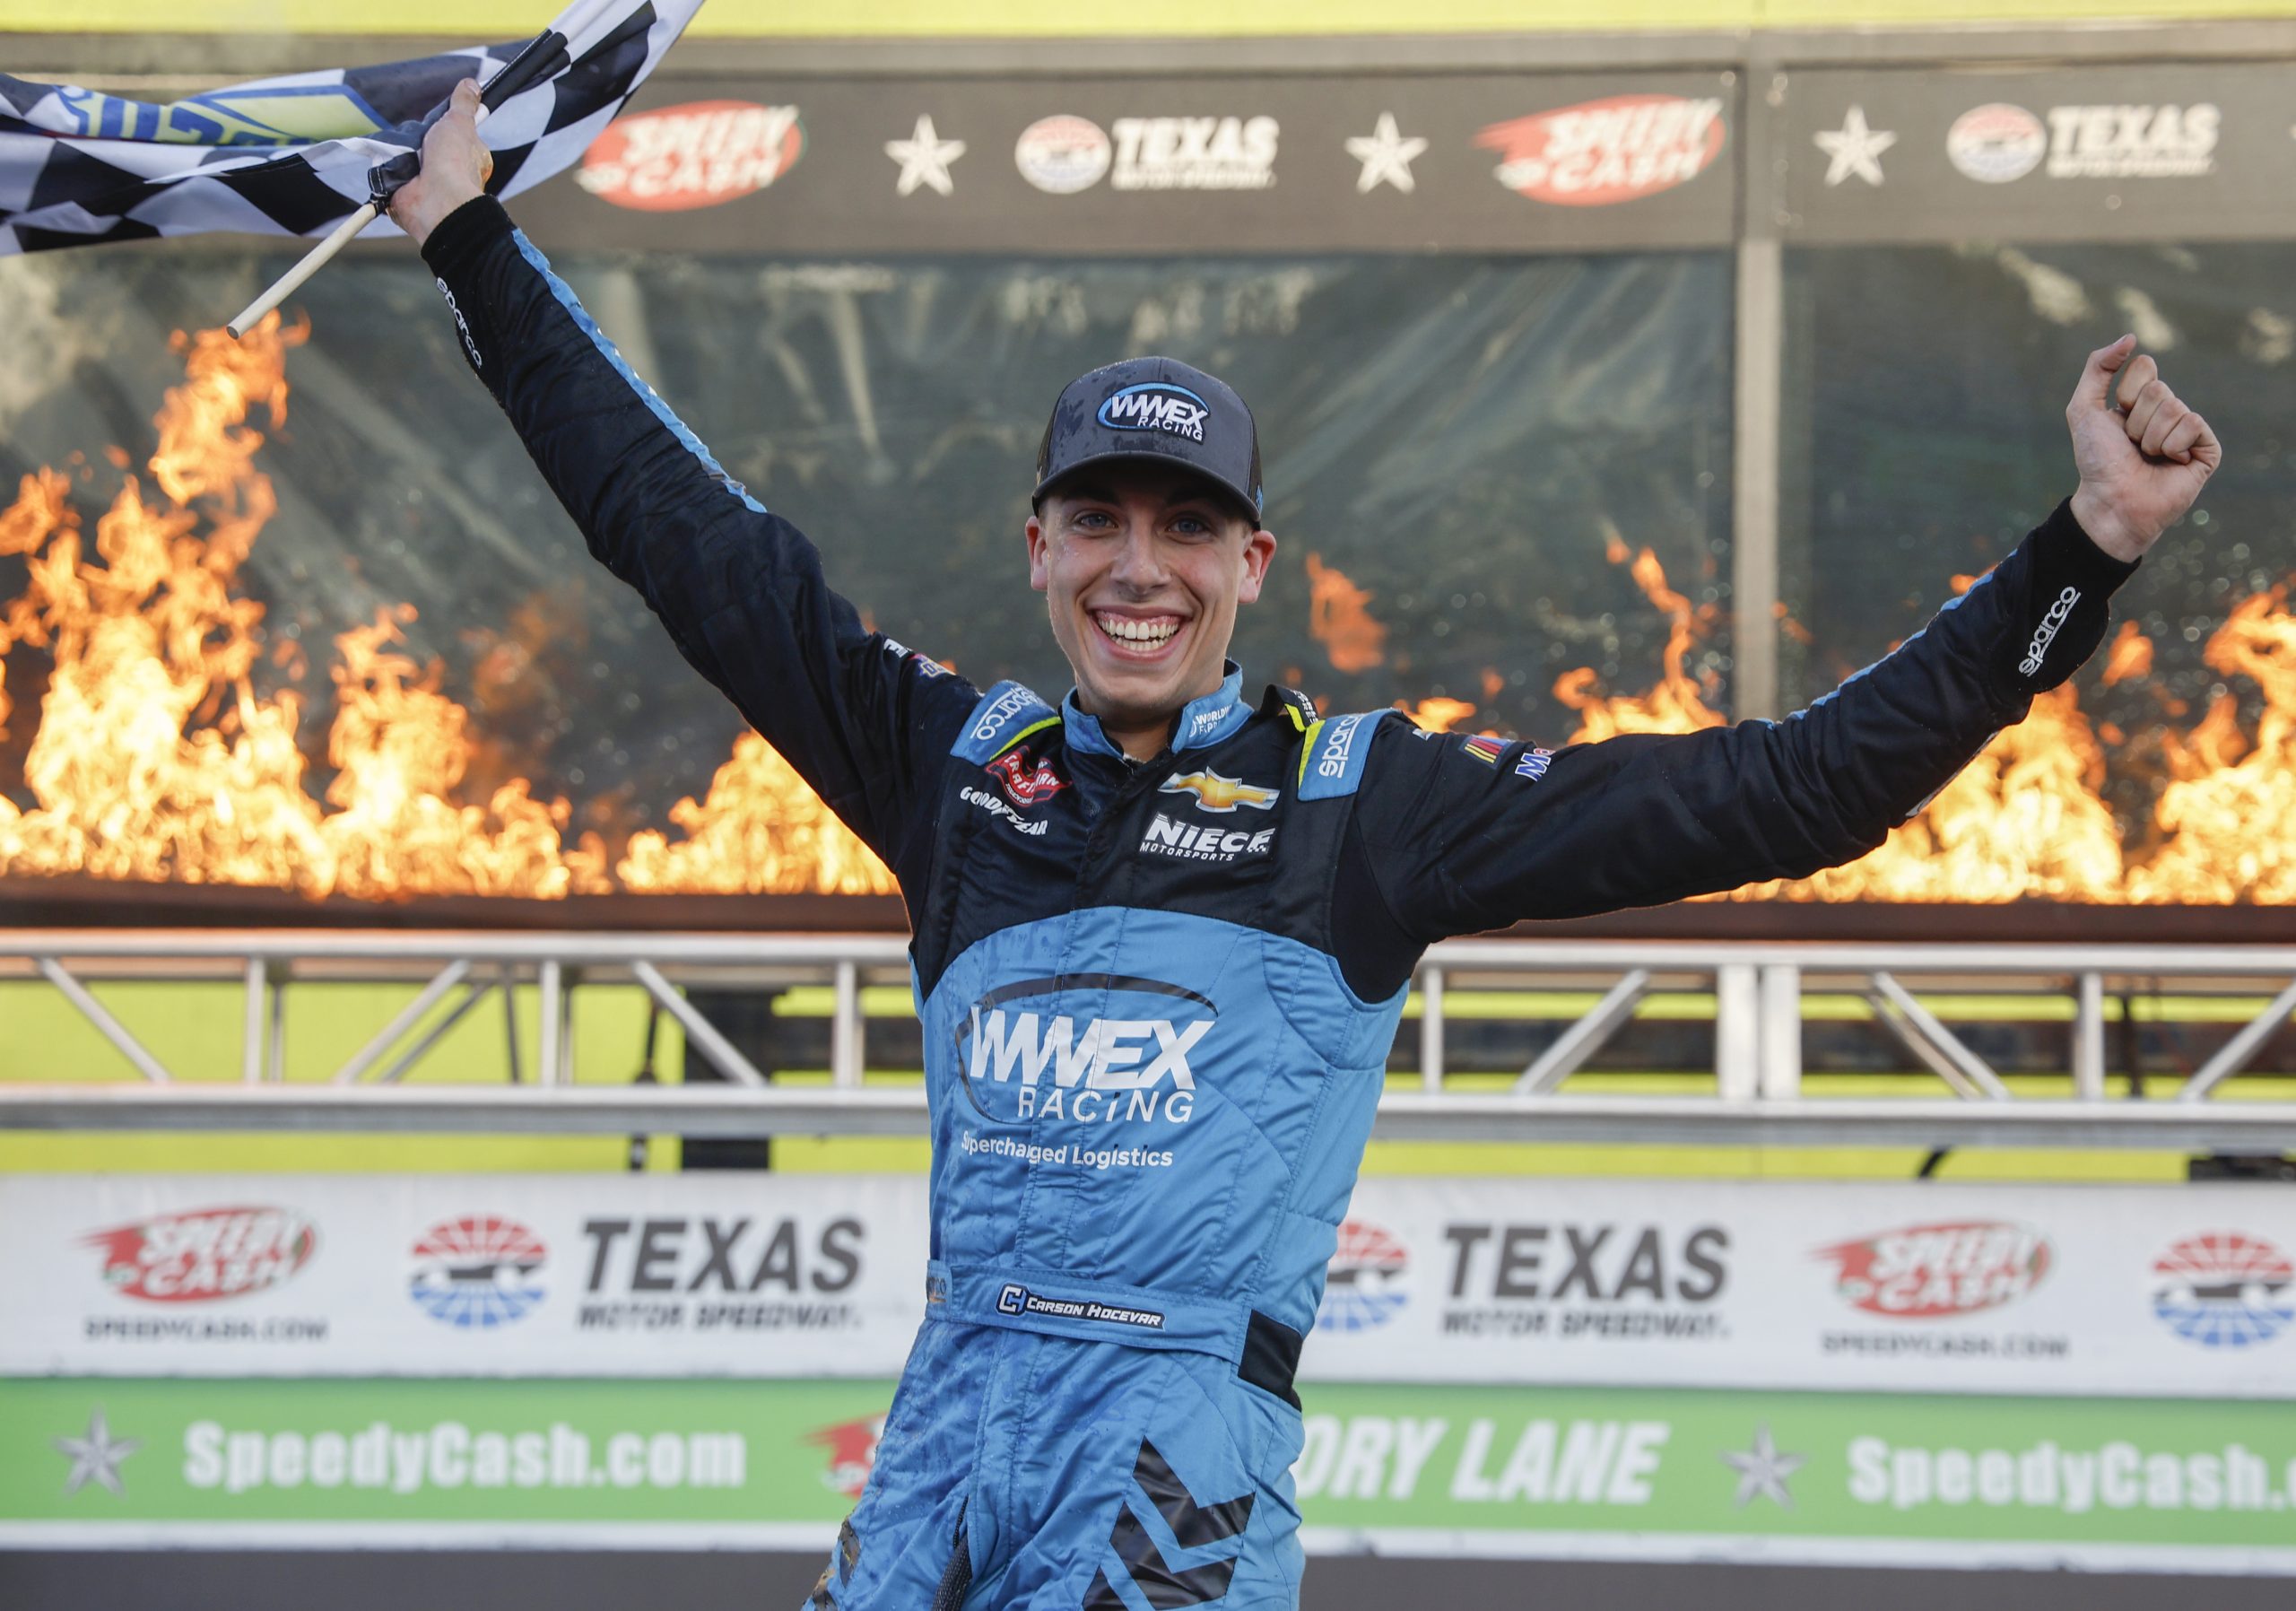 Credit: FORT WORTH, TEXAS - APRIL 01: Carson Hocevar, driver of the #42 Worldwide Express Chevrolet, celebrates in victory lane after winning the NASCAR Craftsman Truck Series SpeedyCash.com 250 at Texas Motor Speedway on April 01, 2023 in Fort Worth, Texas. (Photo by Chris Graythen/Getty Images)